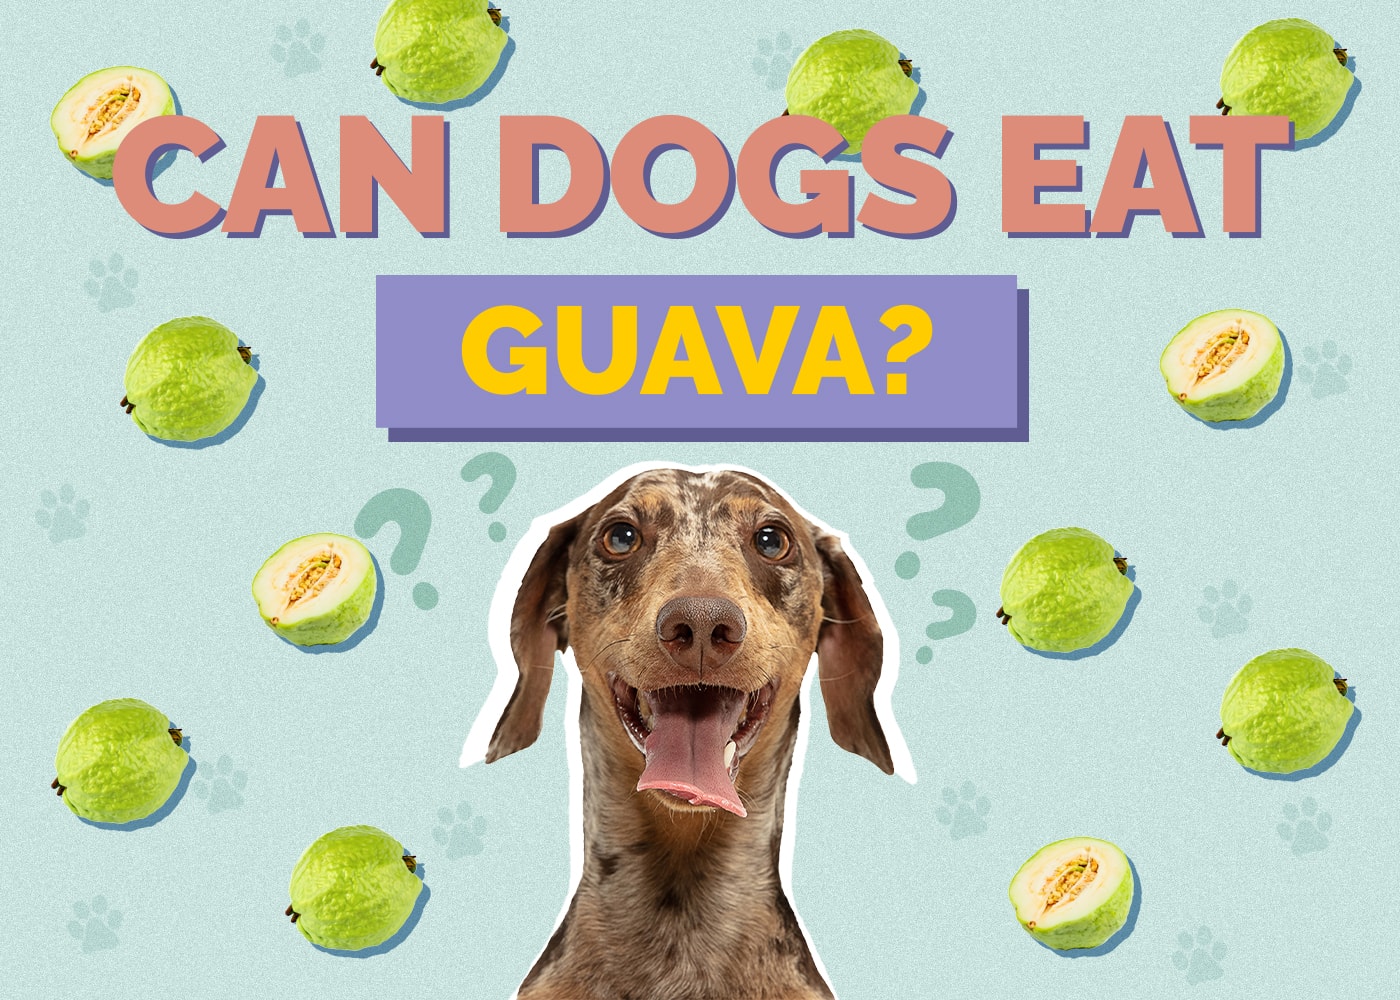 Can Dogs Eat guava